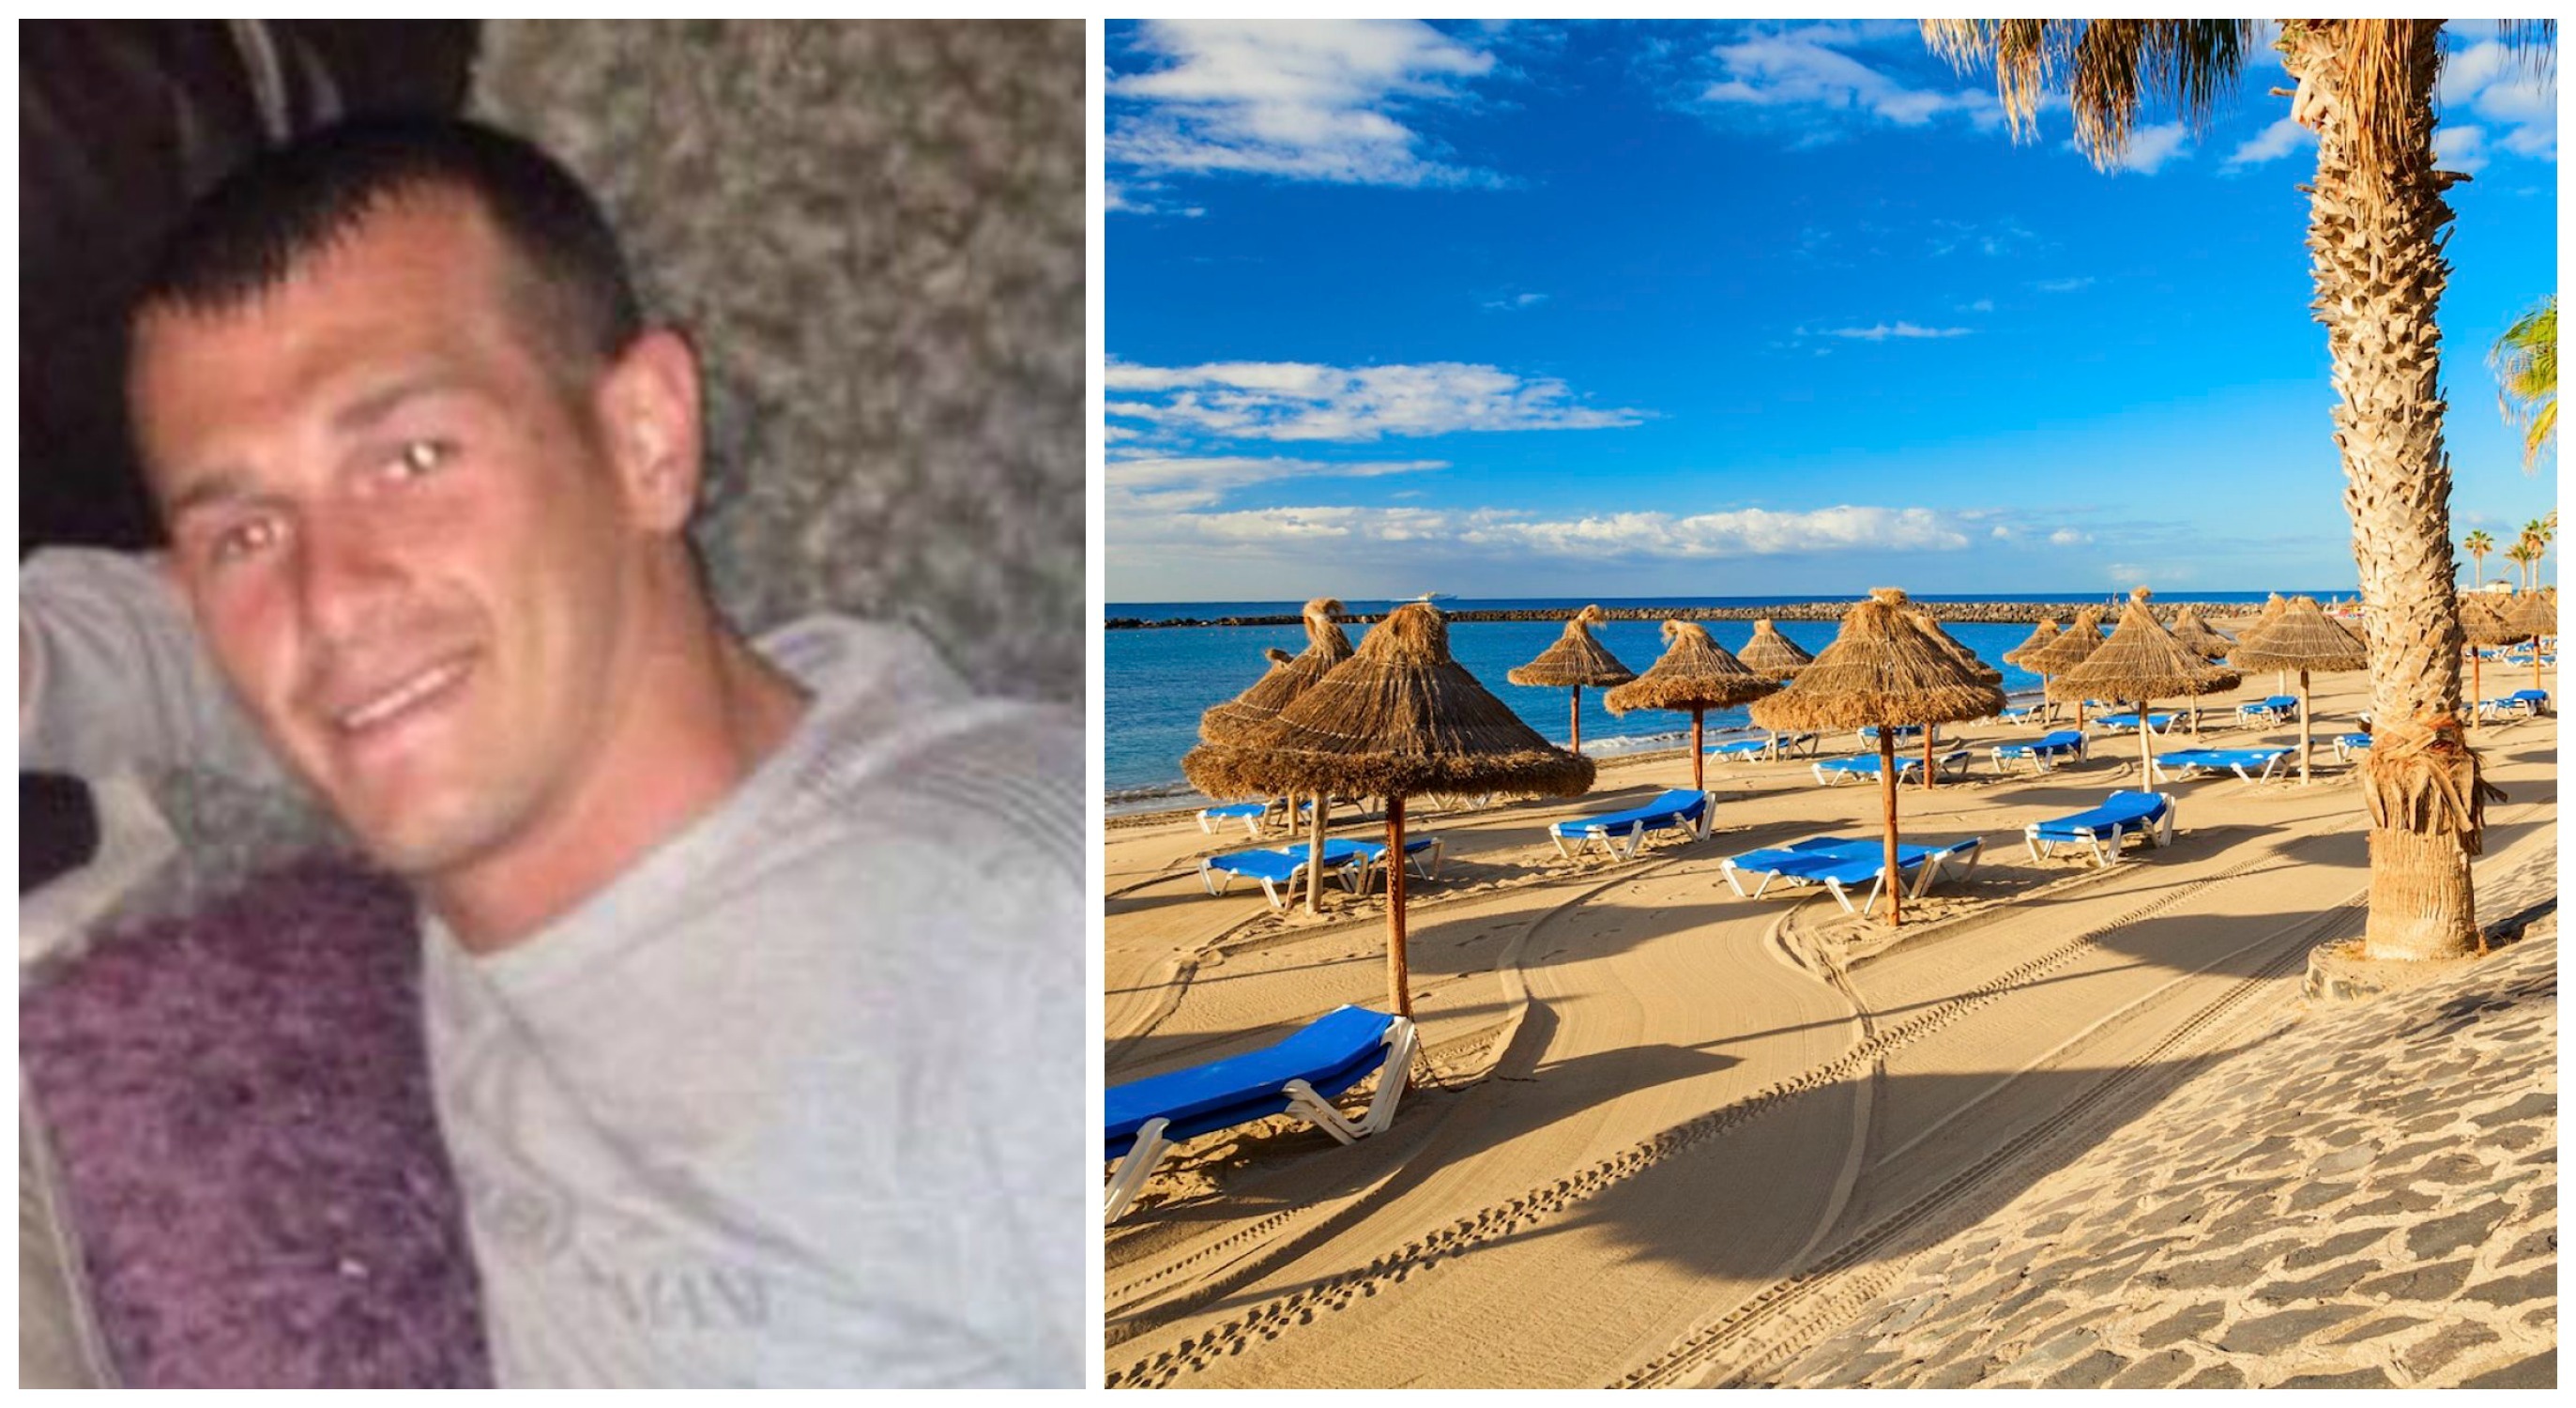 Kevin Daffurn, believed to be the man found dead in Tenerife